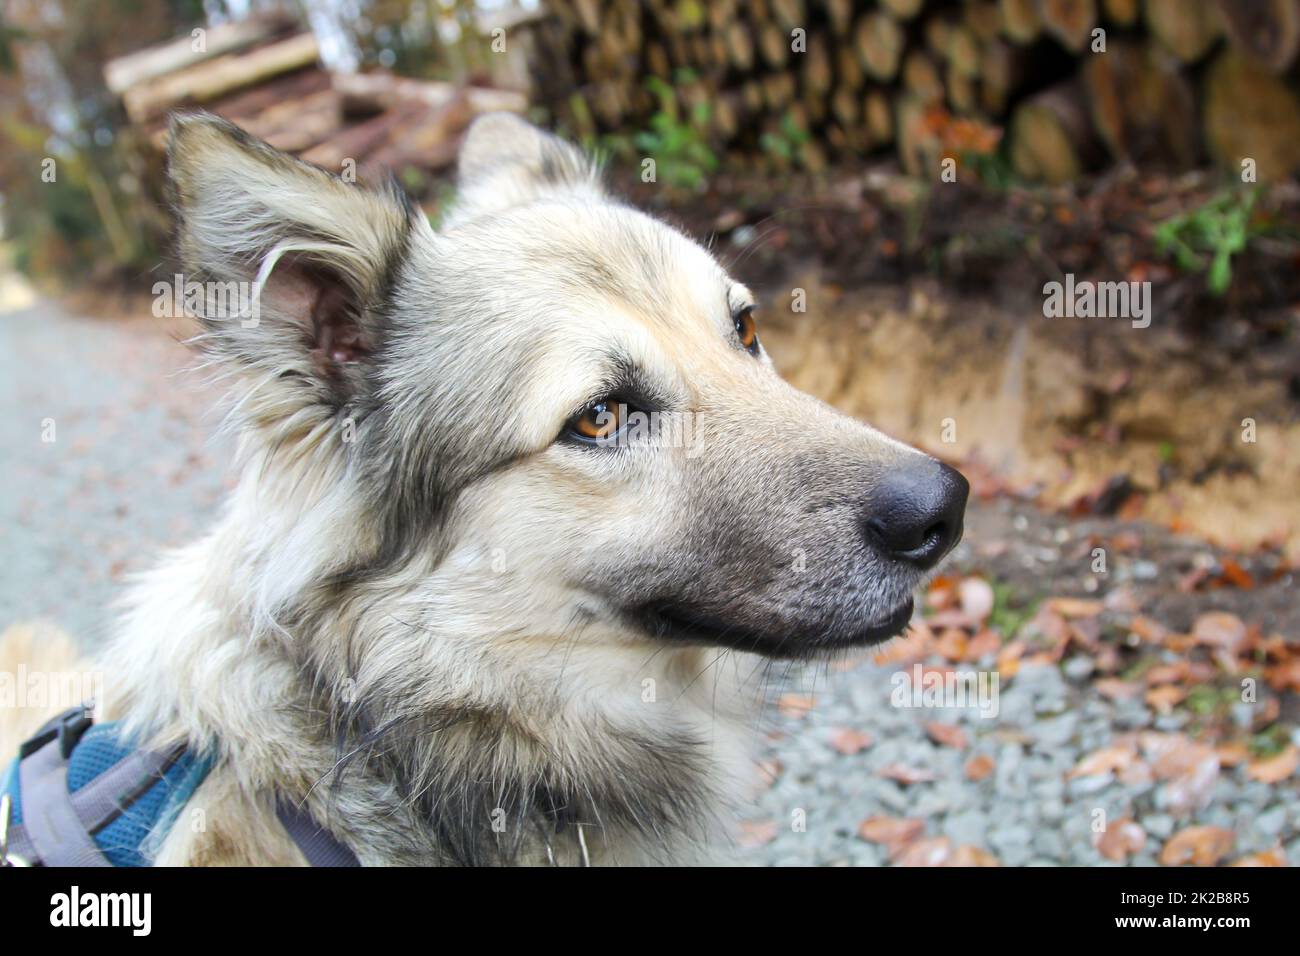 Portrait of a dog in the forest. A dog observes its surroundings. Stock Photo